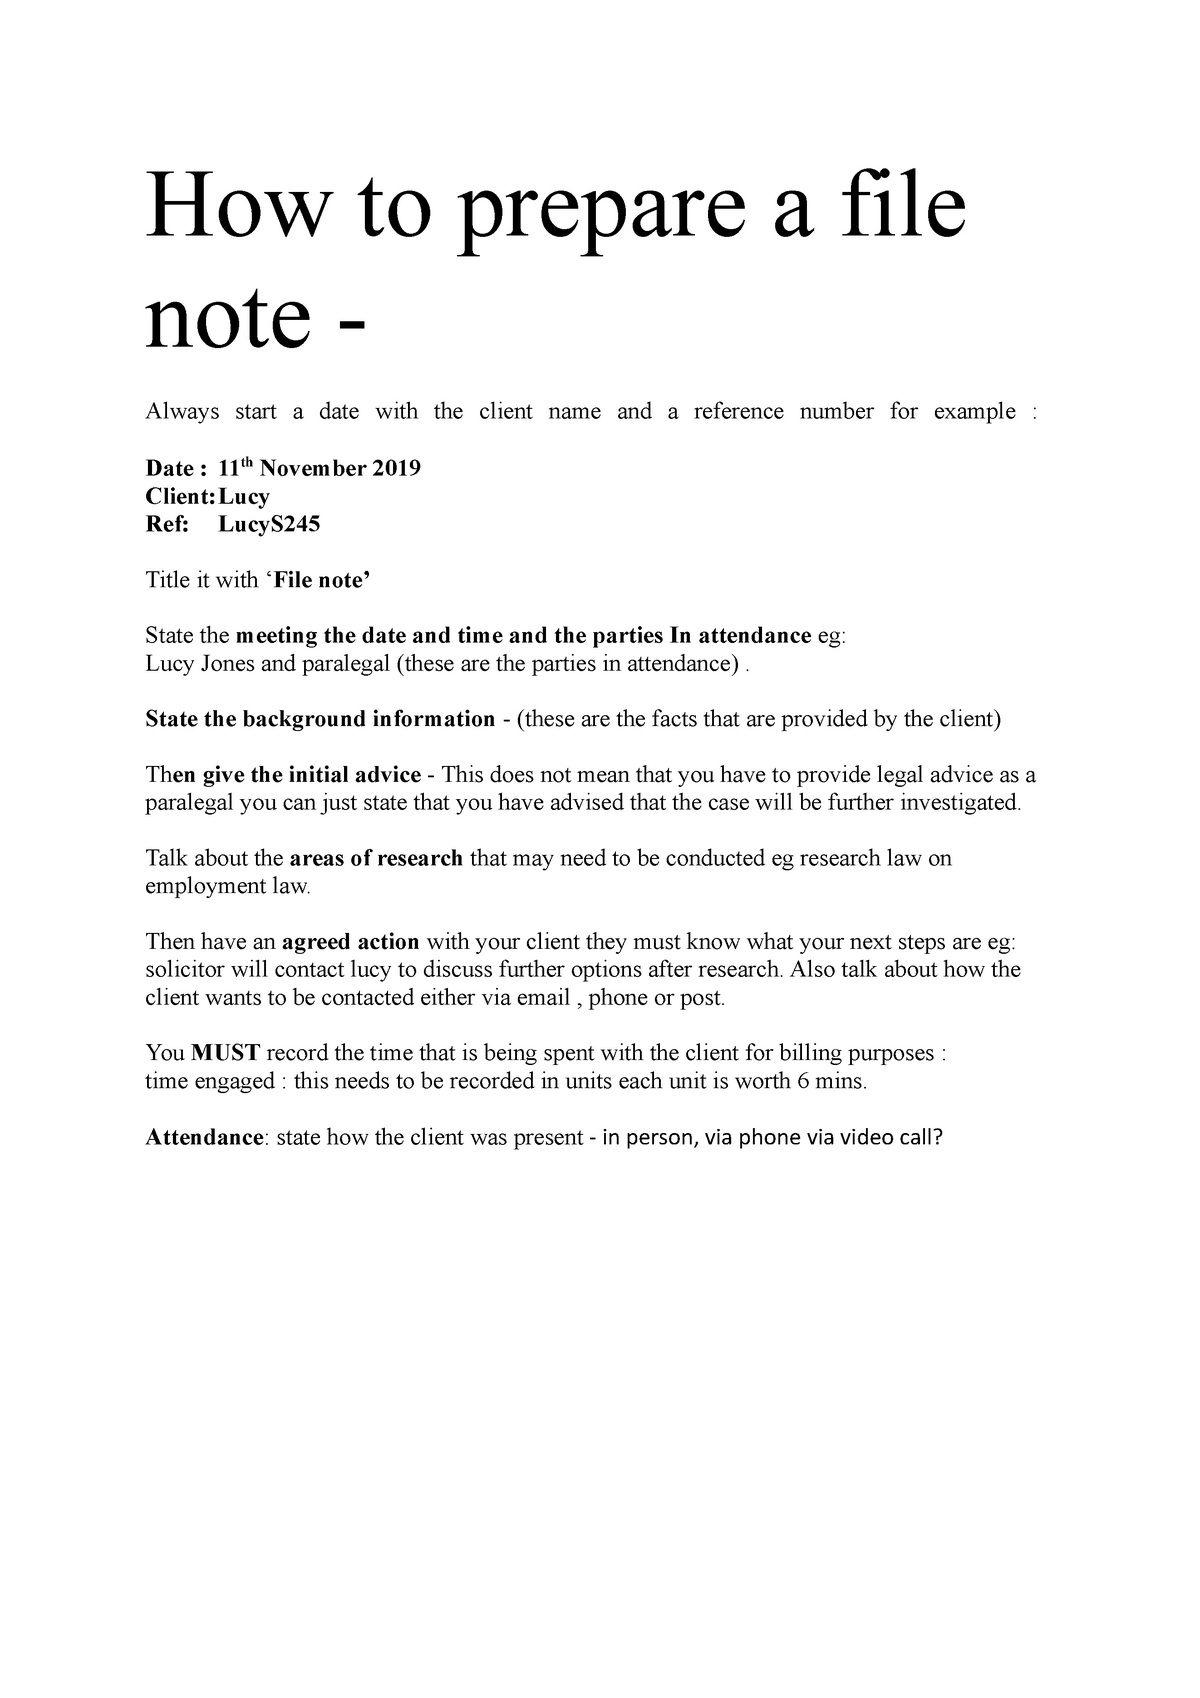 How to prepare a file note - Law In Practice - 20Z20 - MMU In Legal File Note Template